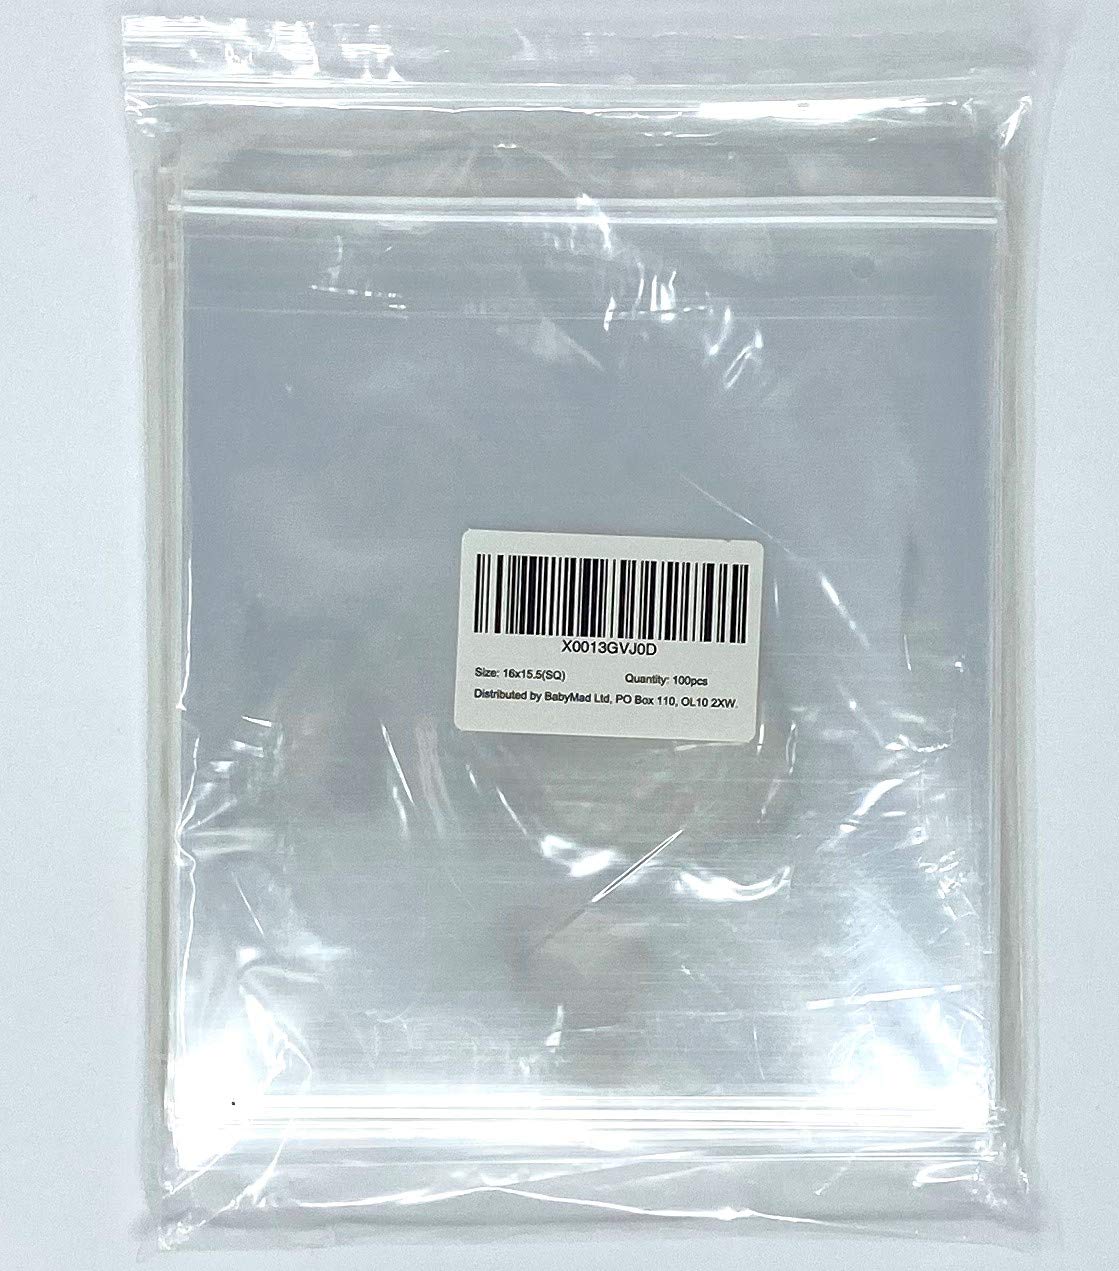 6 inchesx6 inches Cello Bags - Cellophane Greeting Card Display Bags 36 Micron Self Seal - 160mm x 160mm and 35mm Flap (100)